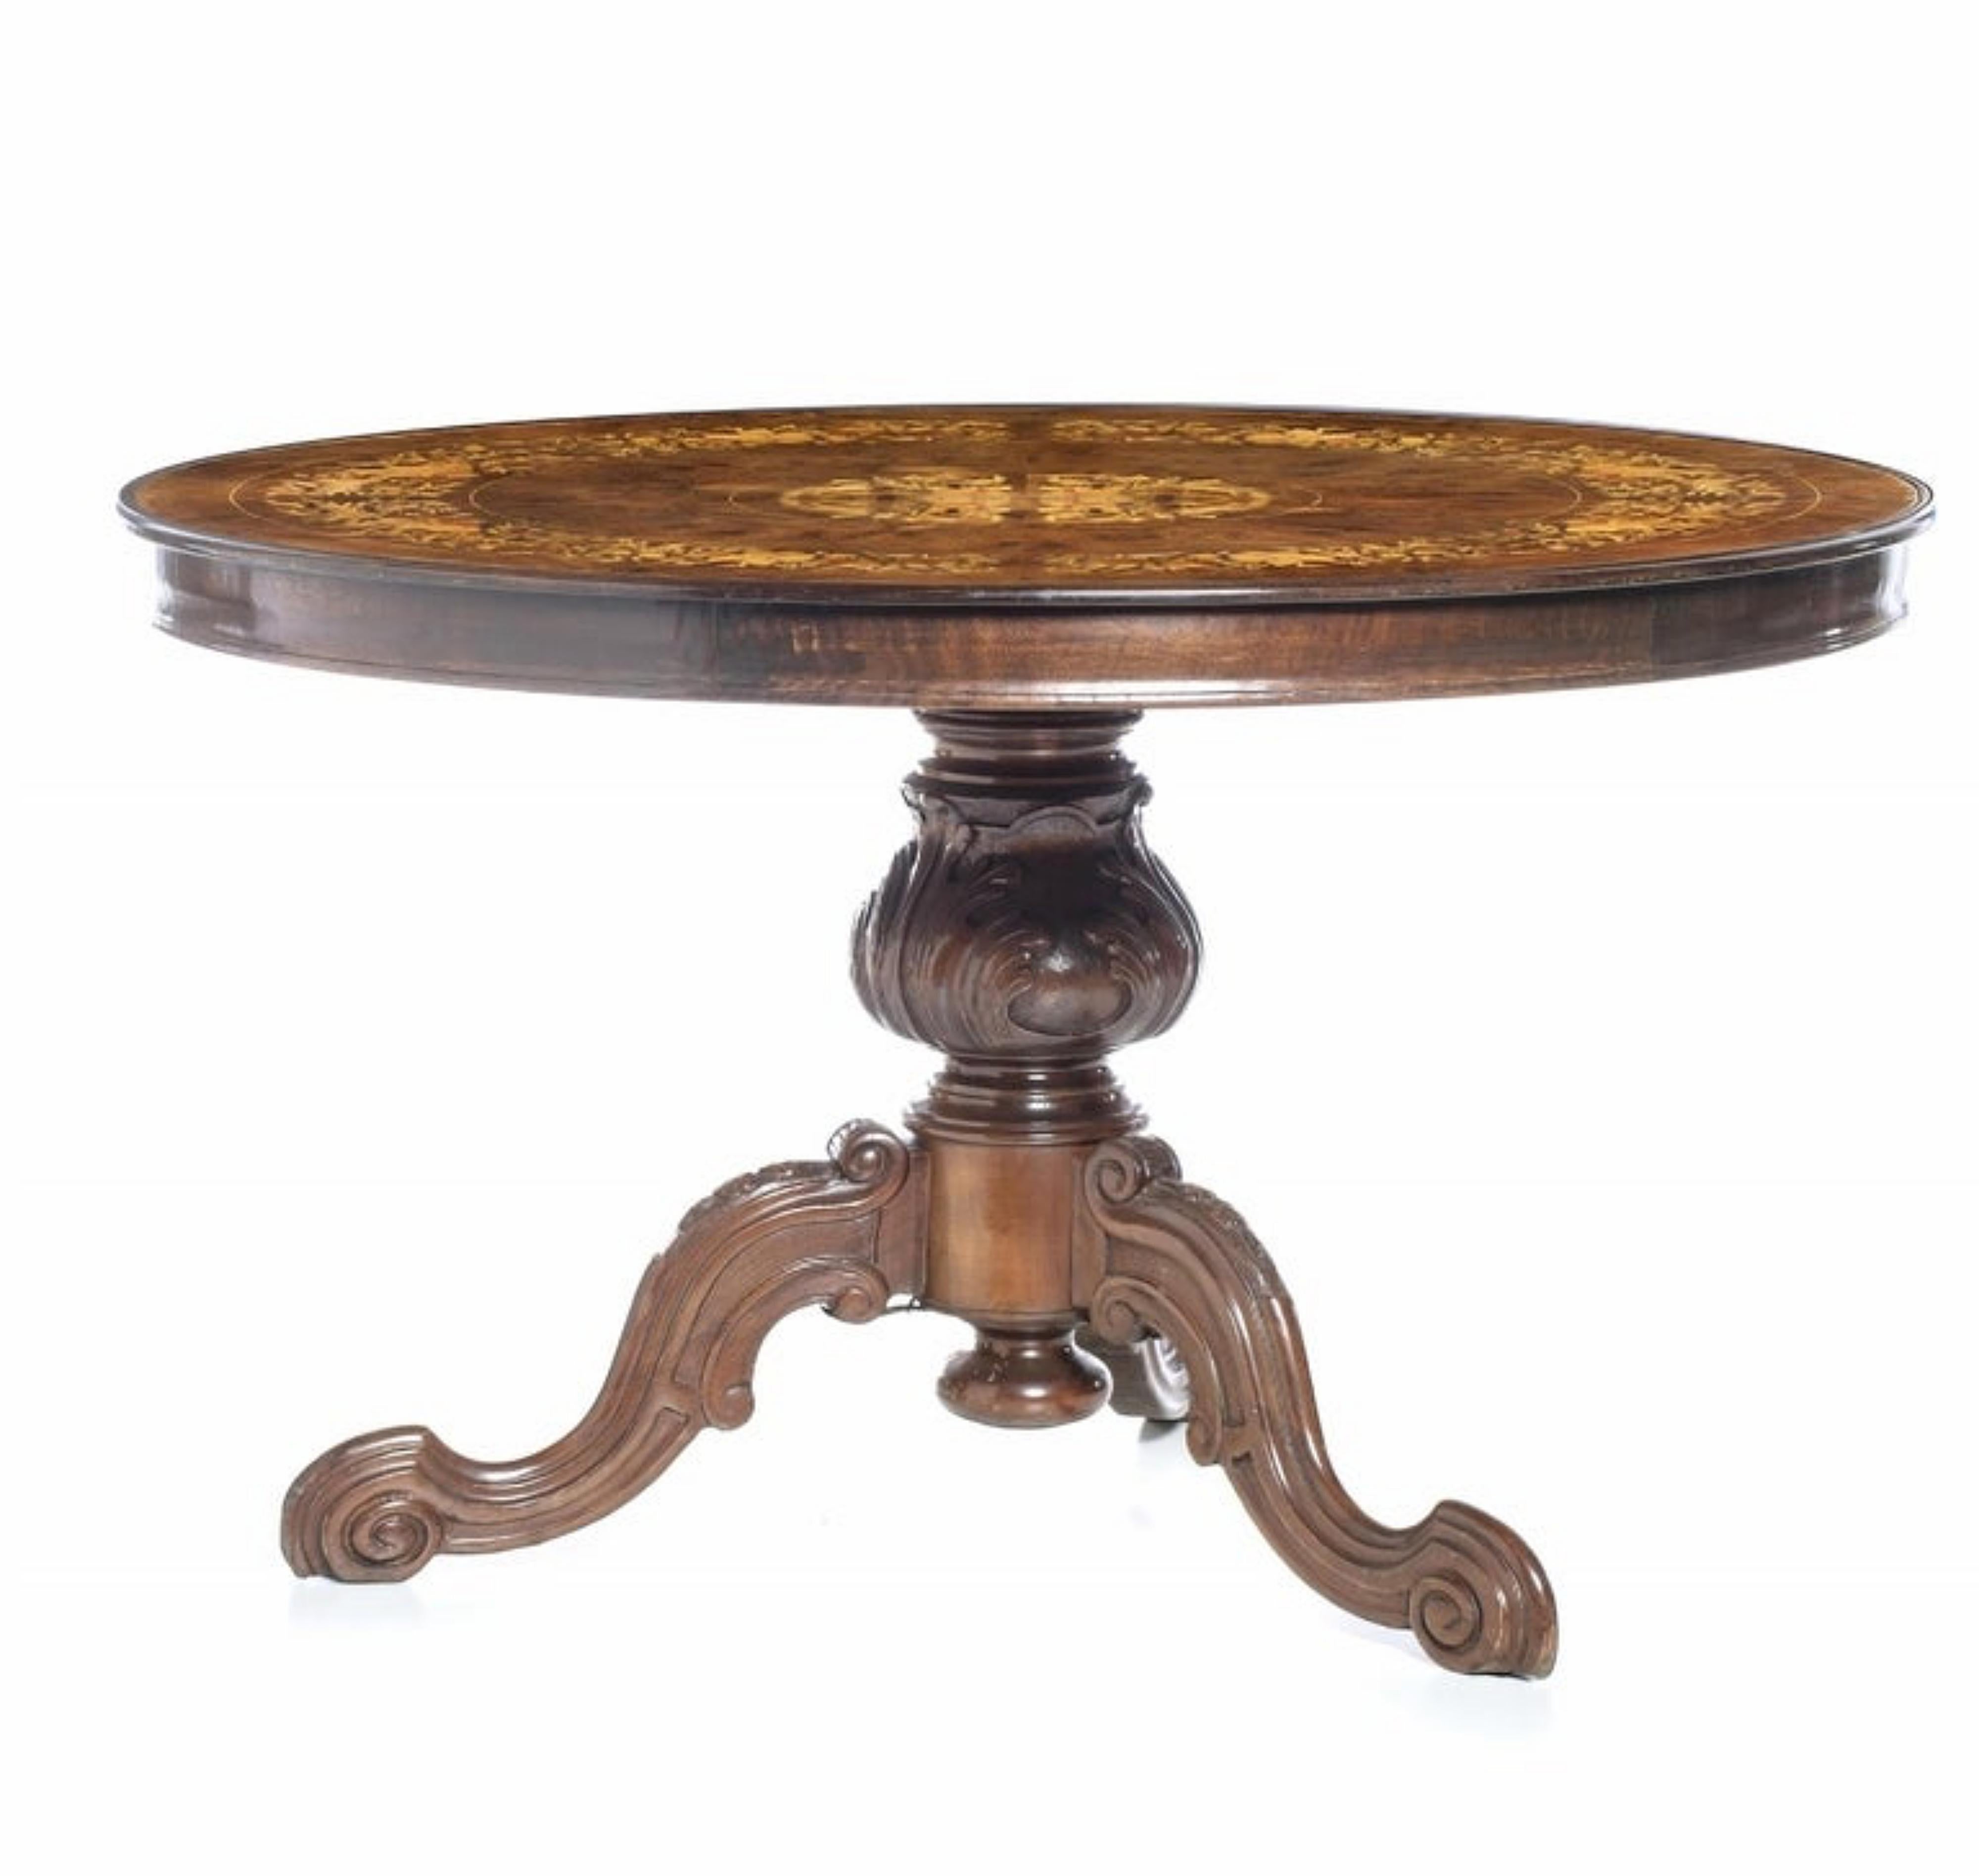 Center table
Portuguese,
19th century
In mahogany and satin wood. 
Round top decorated with 